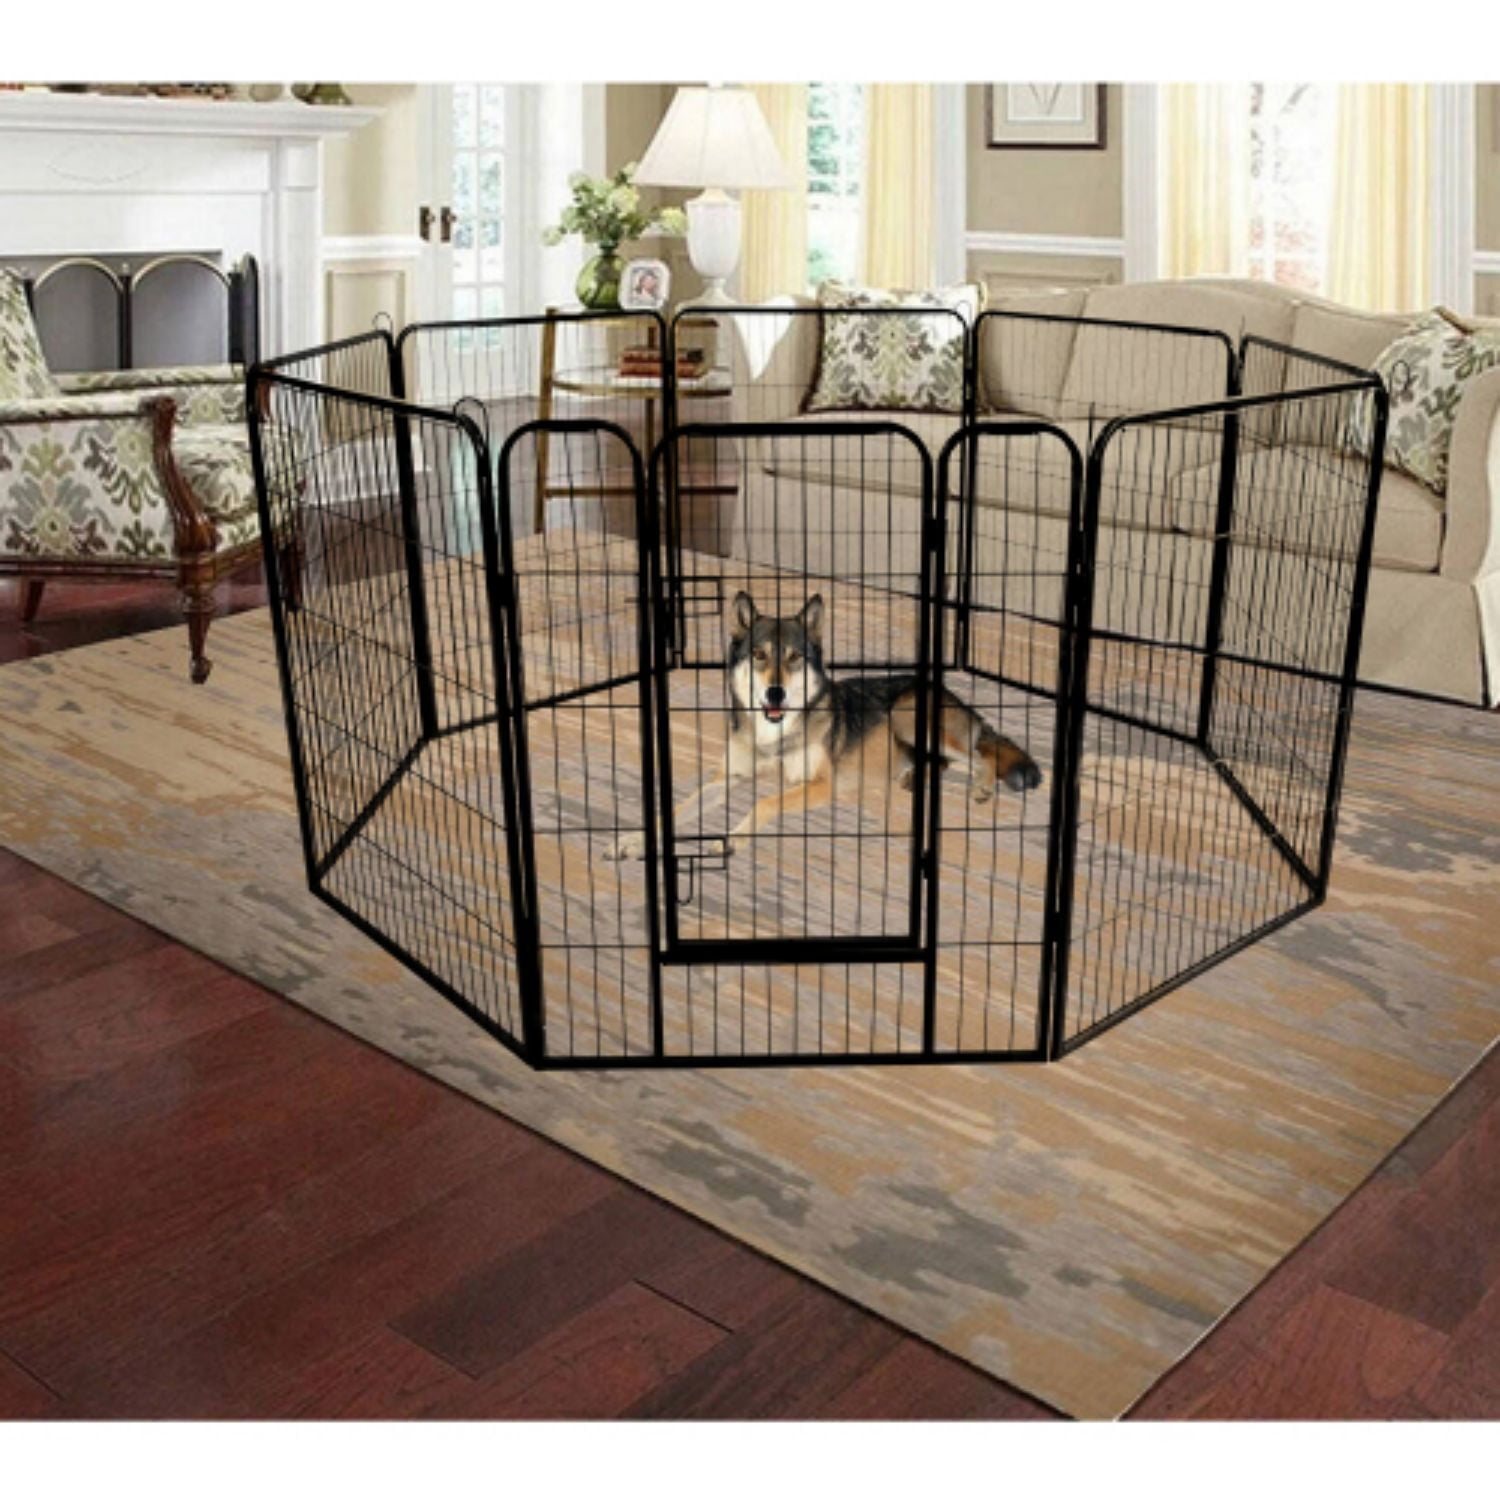 PEEKABOO Dog Pen Puppy Playpen Dog Fence Indoor Foldable Metal Wire Exercise Pen Dog Play Yard Gate Pet Enclosure Outdoor for Small Large Dogs Rabbits Bunny 8 Panels 24 & 42 